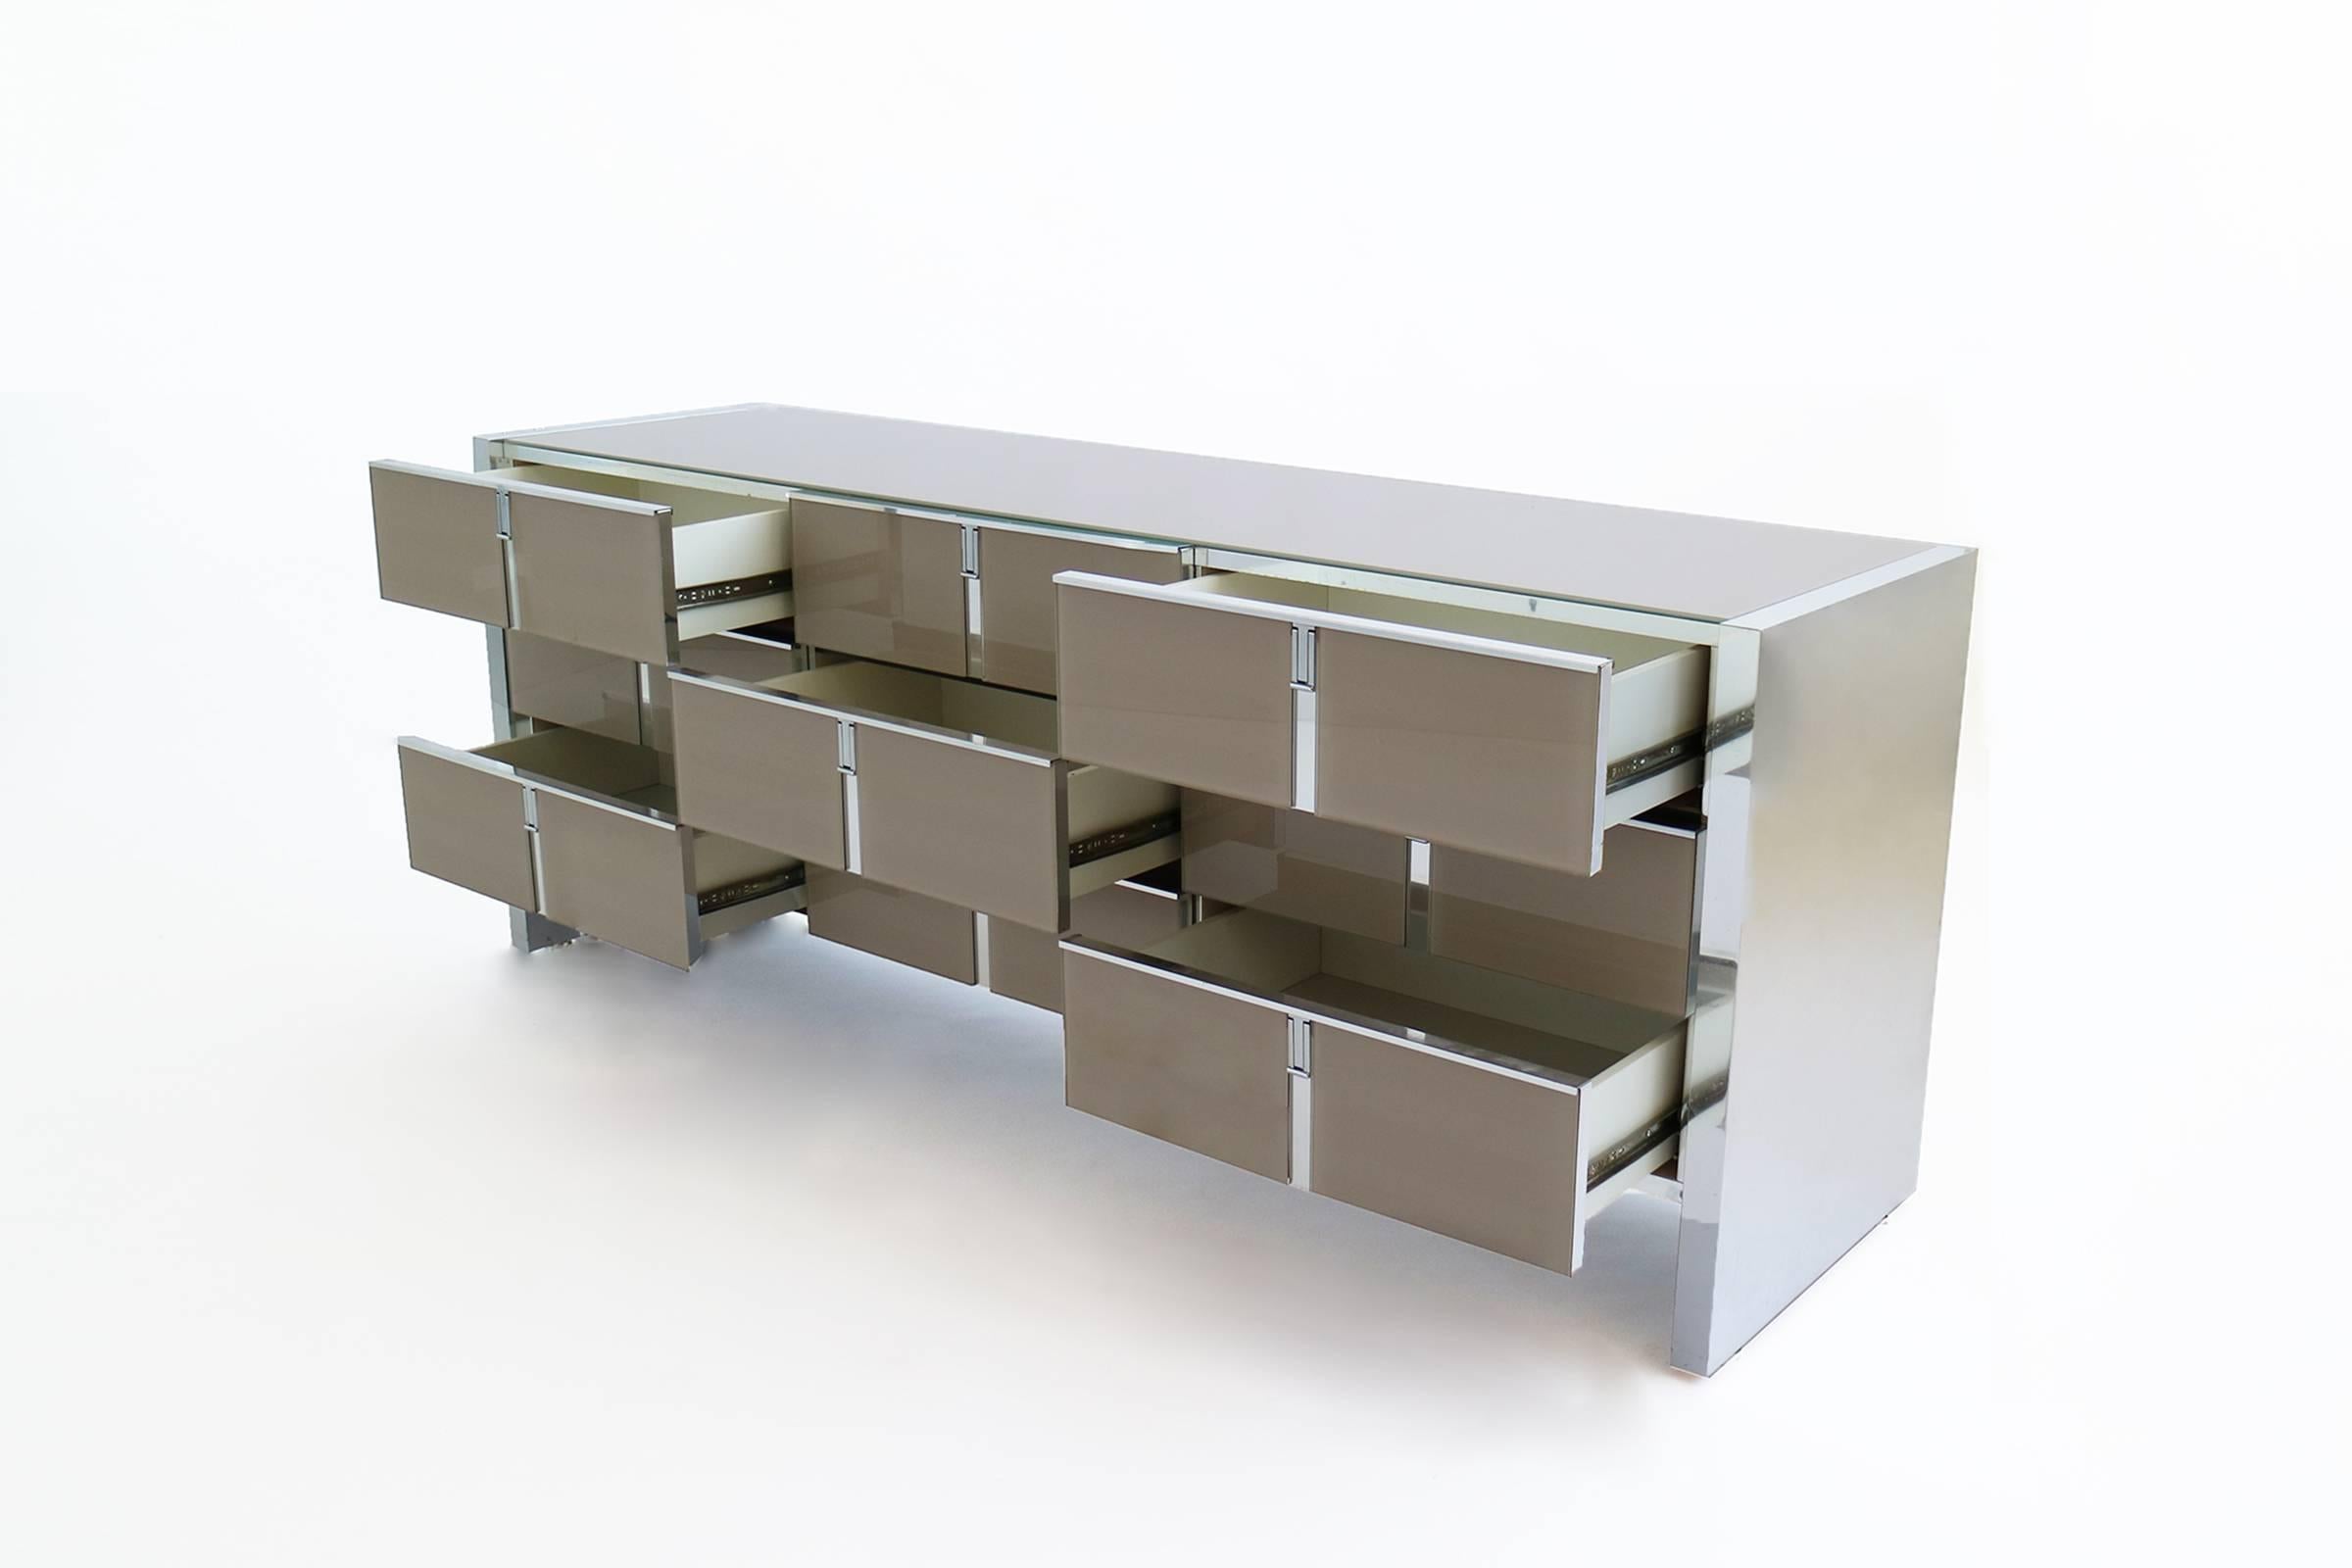 Chrome wrapped legs, with glass faced drawers and surface. Nine pull-out drawers.